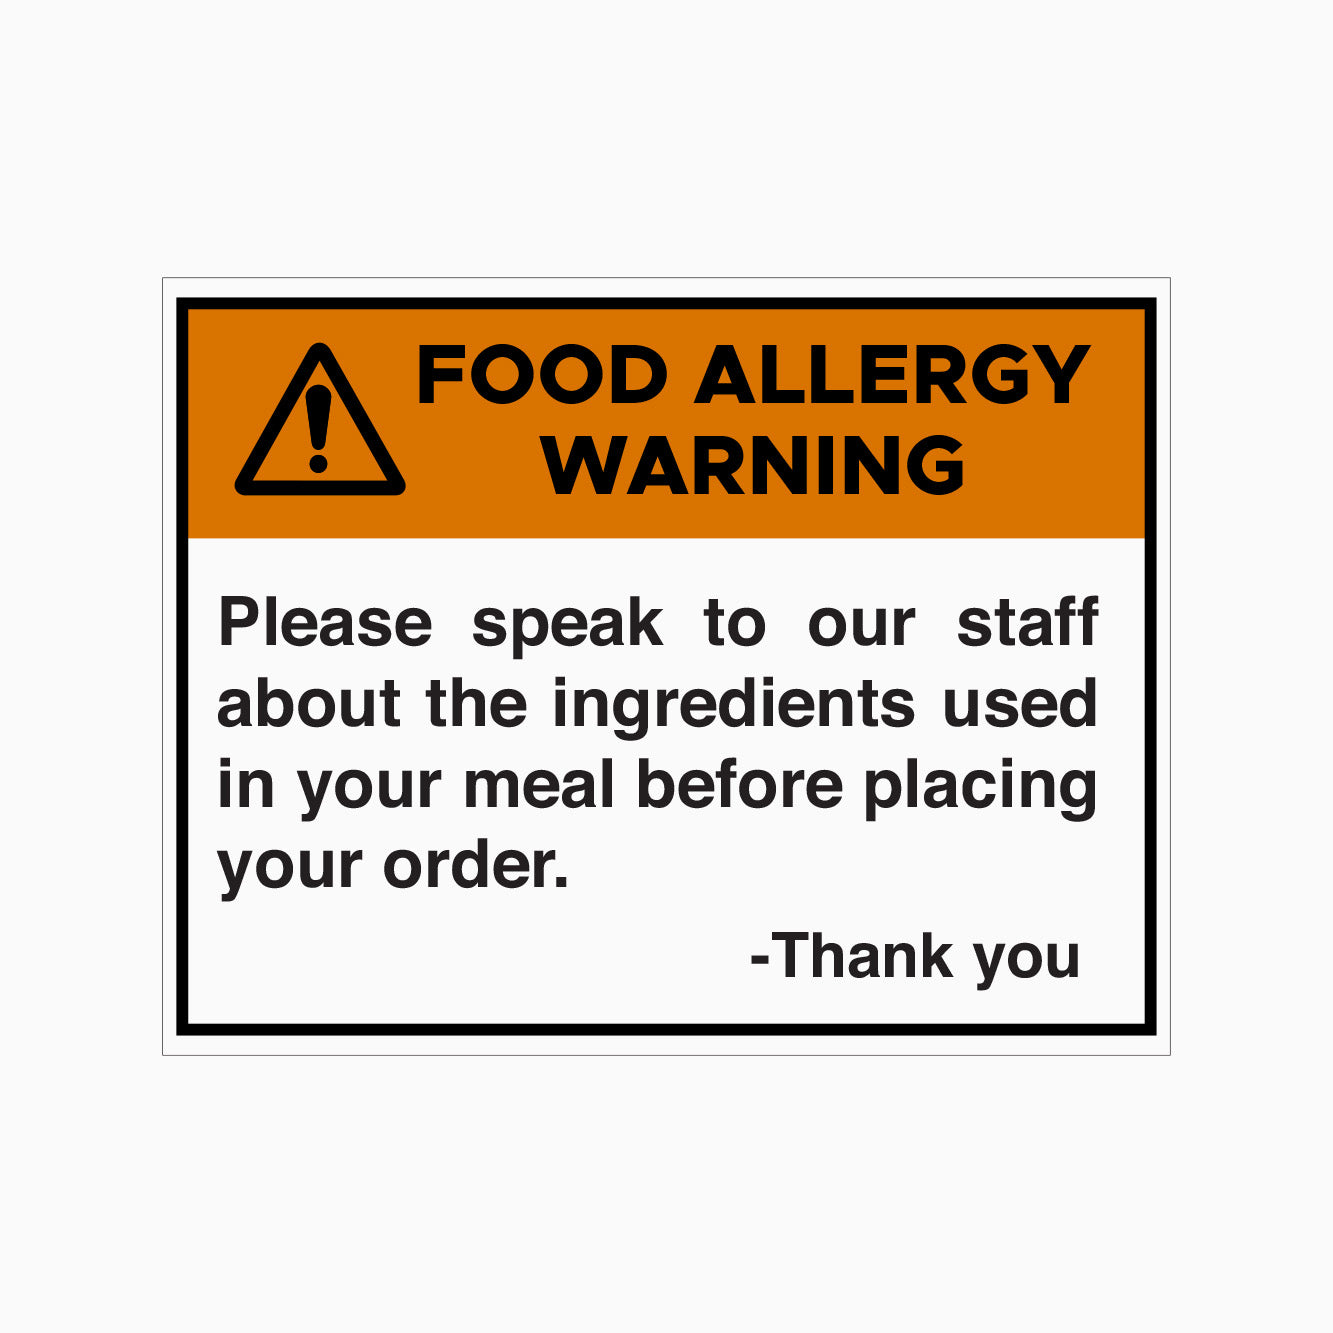 FOOD ALLERGY WARNING SIGN - PLEASE SPEAK TO OUR STAFF ABOUT THE INGREDIENTS USED IN YOUR MEAL BEFORE PLACING YOUR ORDER SIGN